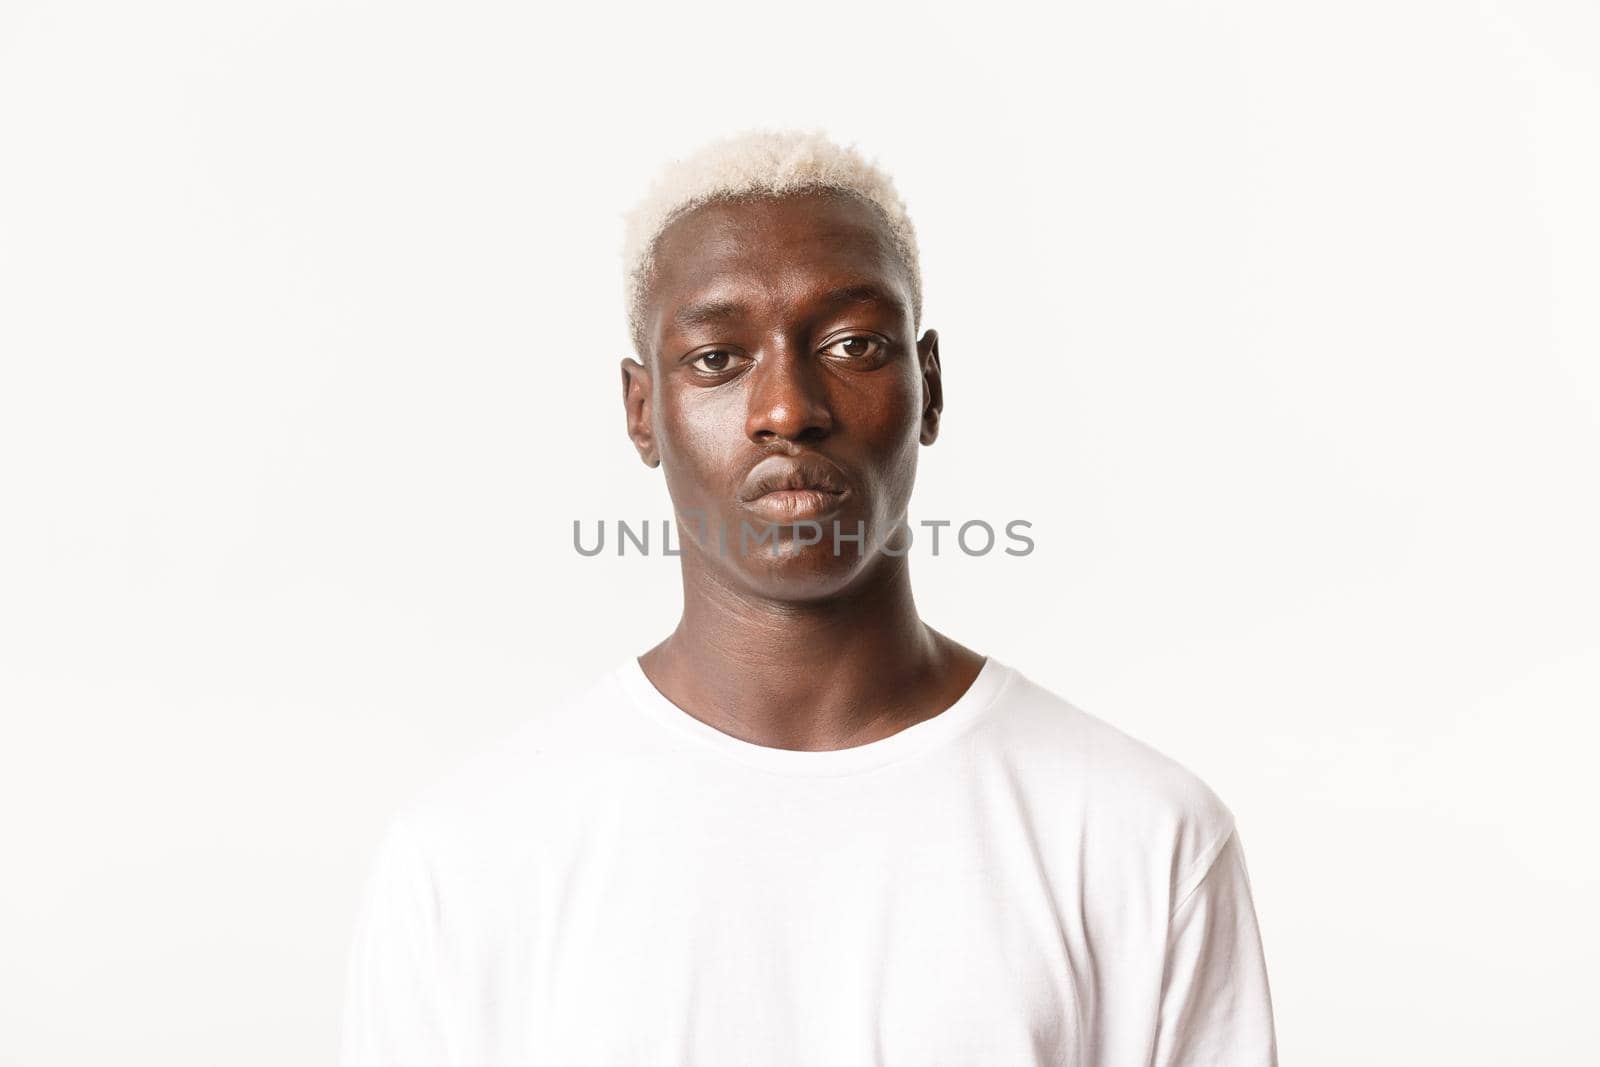 Close-up of serious handsome african-american blond stylish guy, looking at camera determined and calm, standing white background.